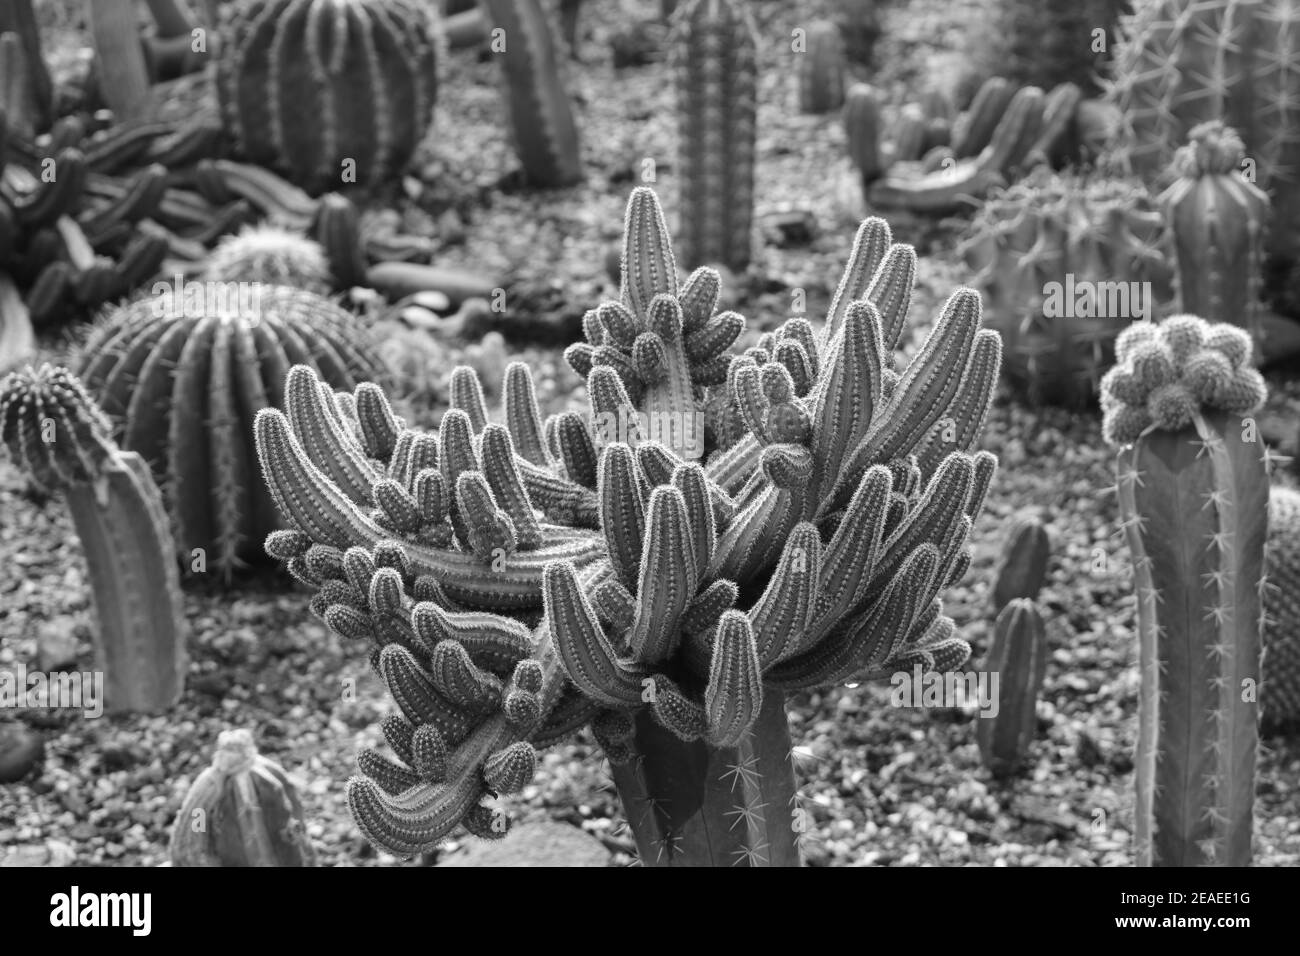 Different types of Cacti and Succulents in monochrome. Stock Photo